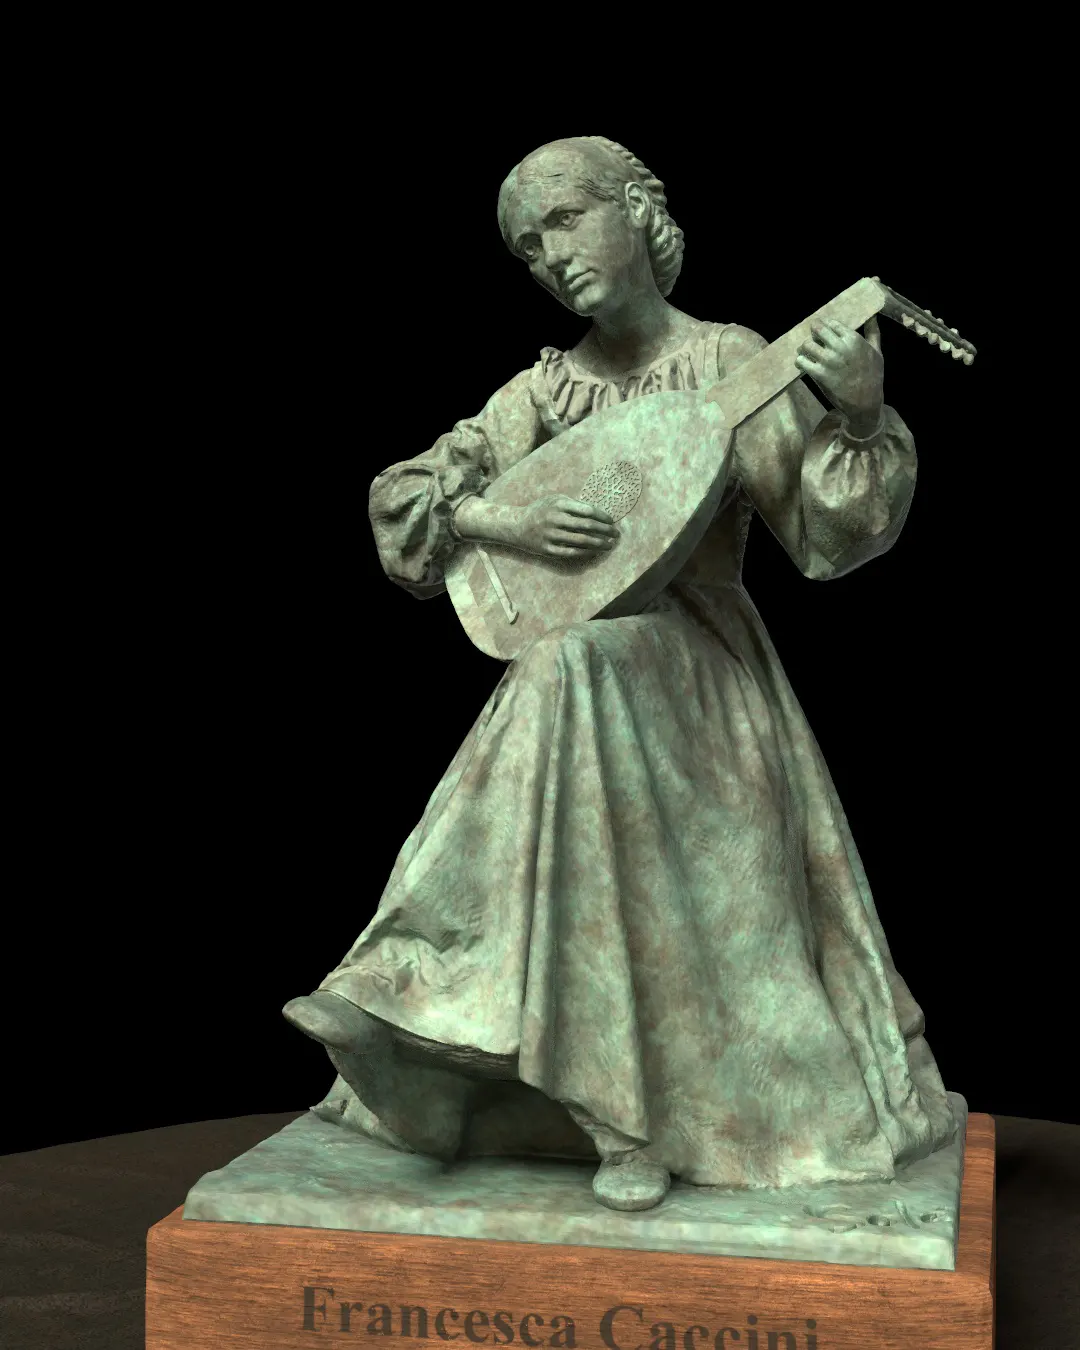 Francesca-Caccini-statue/Rendering-of-Francesca-Caccini-statue-modeled-by-Emil-Sole-7.webp